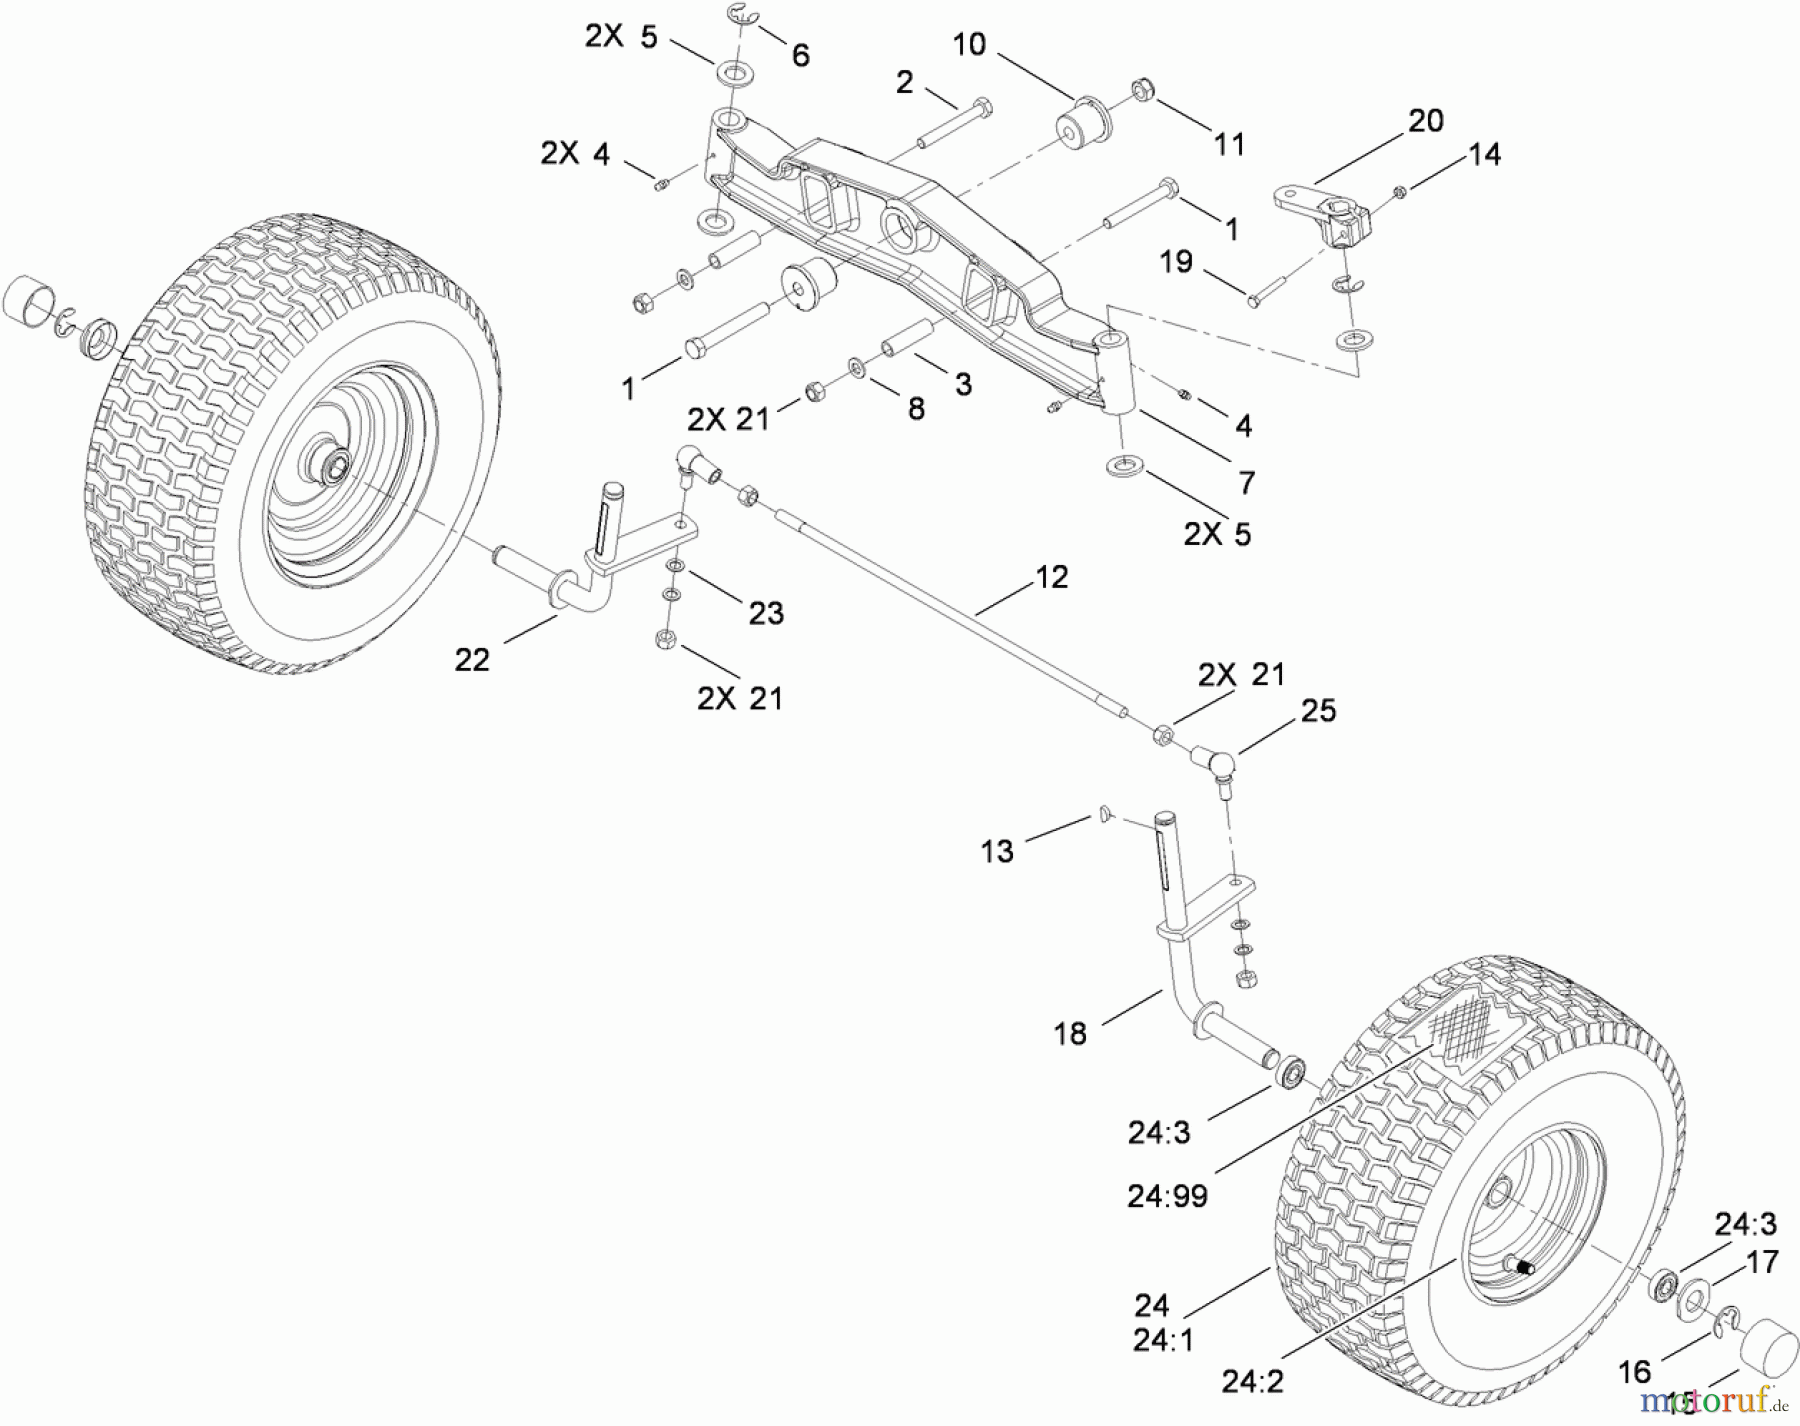  Toro Neu Mowers, Lawn & Garden Tractor Seite 1 74593 (DH 220) - Toro DH 220 Lawn Tractor, 2010 (310000001-310999999) FRONT AXLE ASSEMBLY